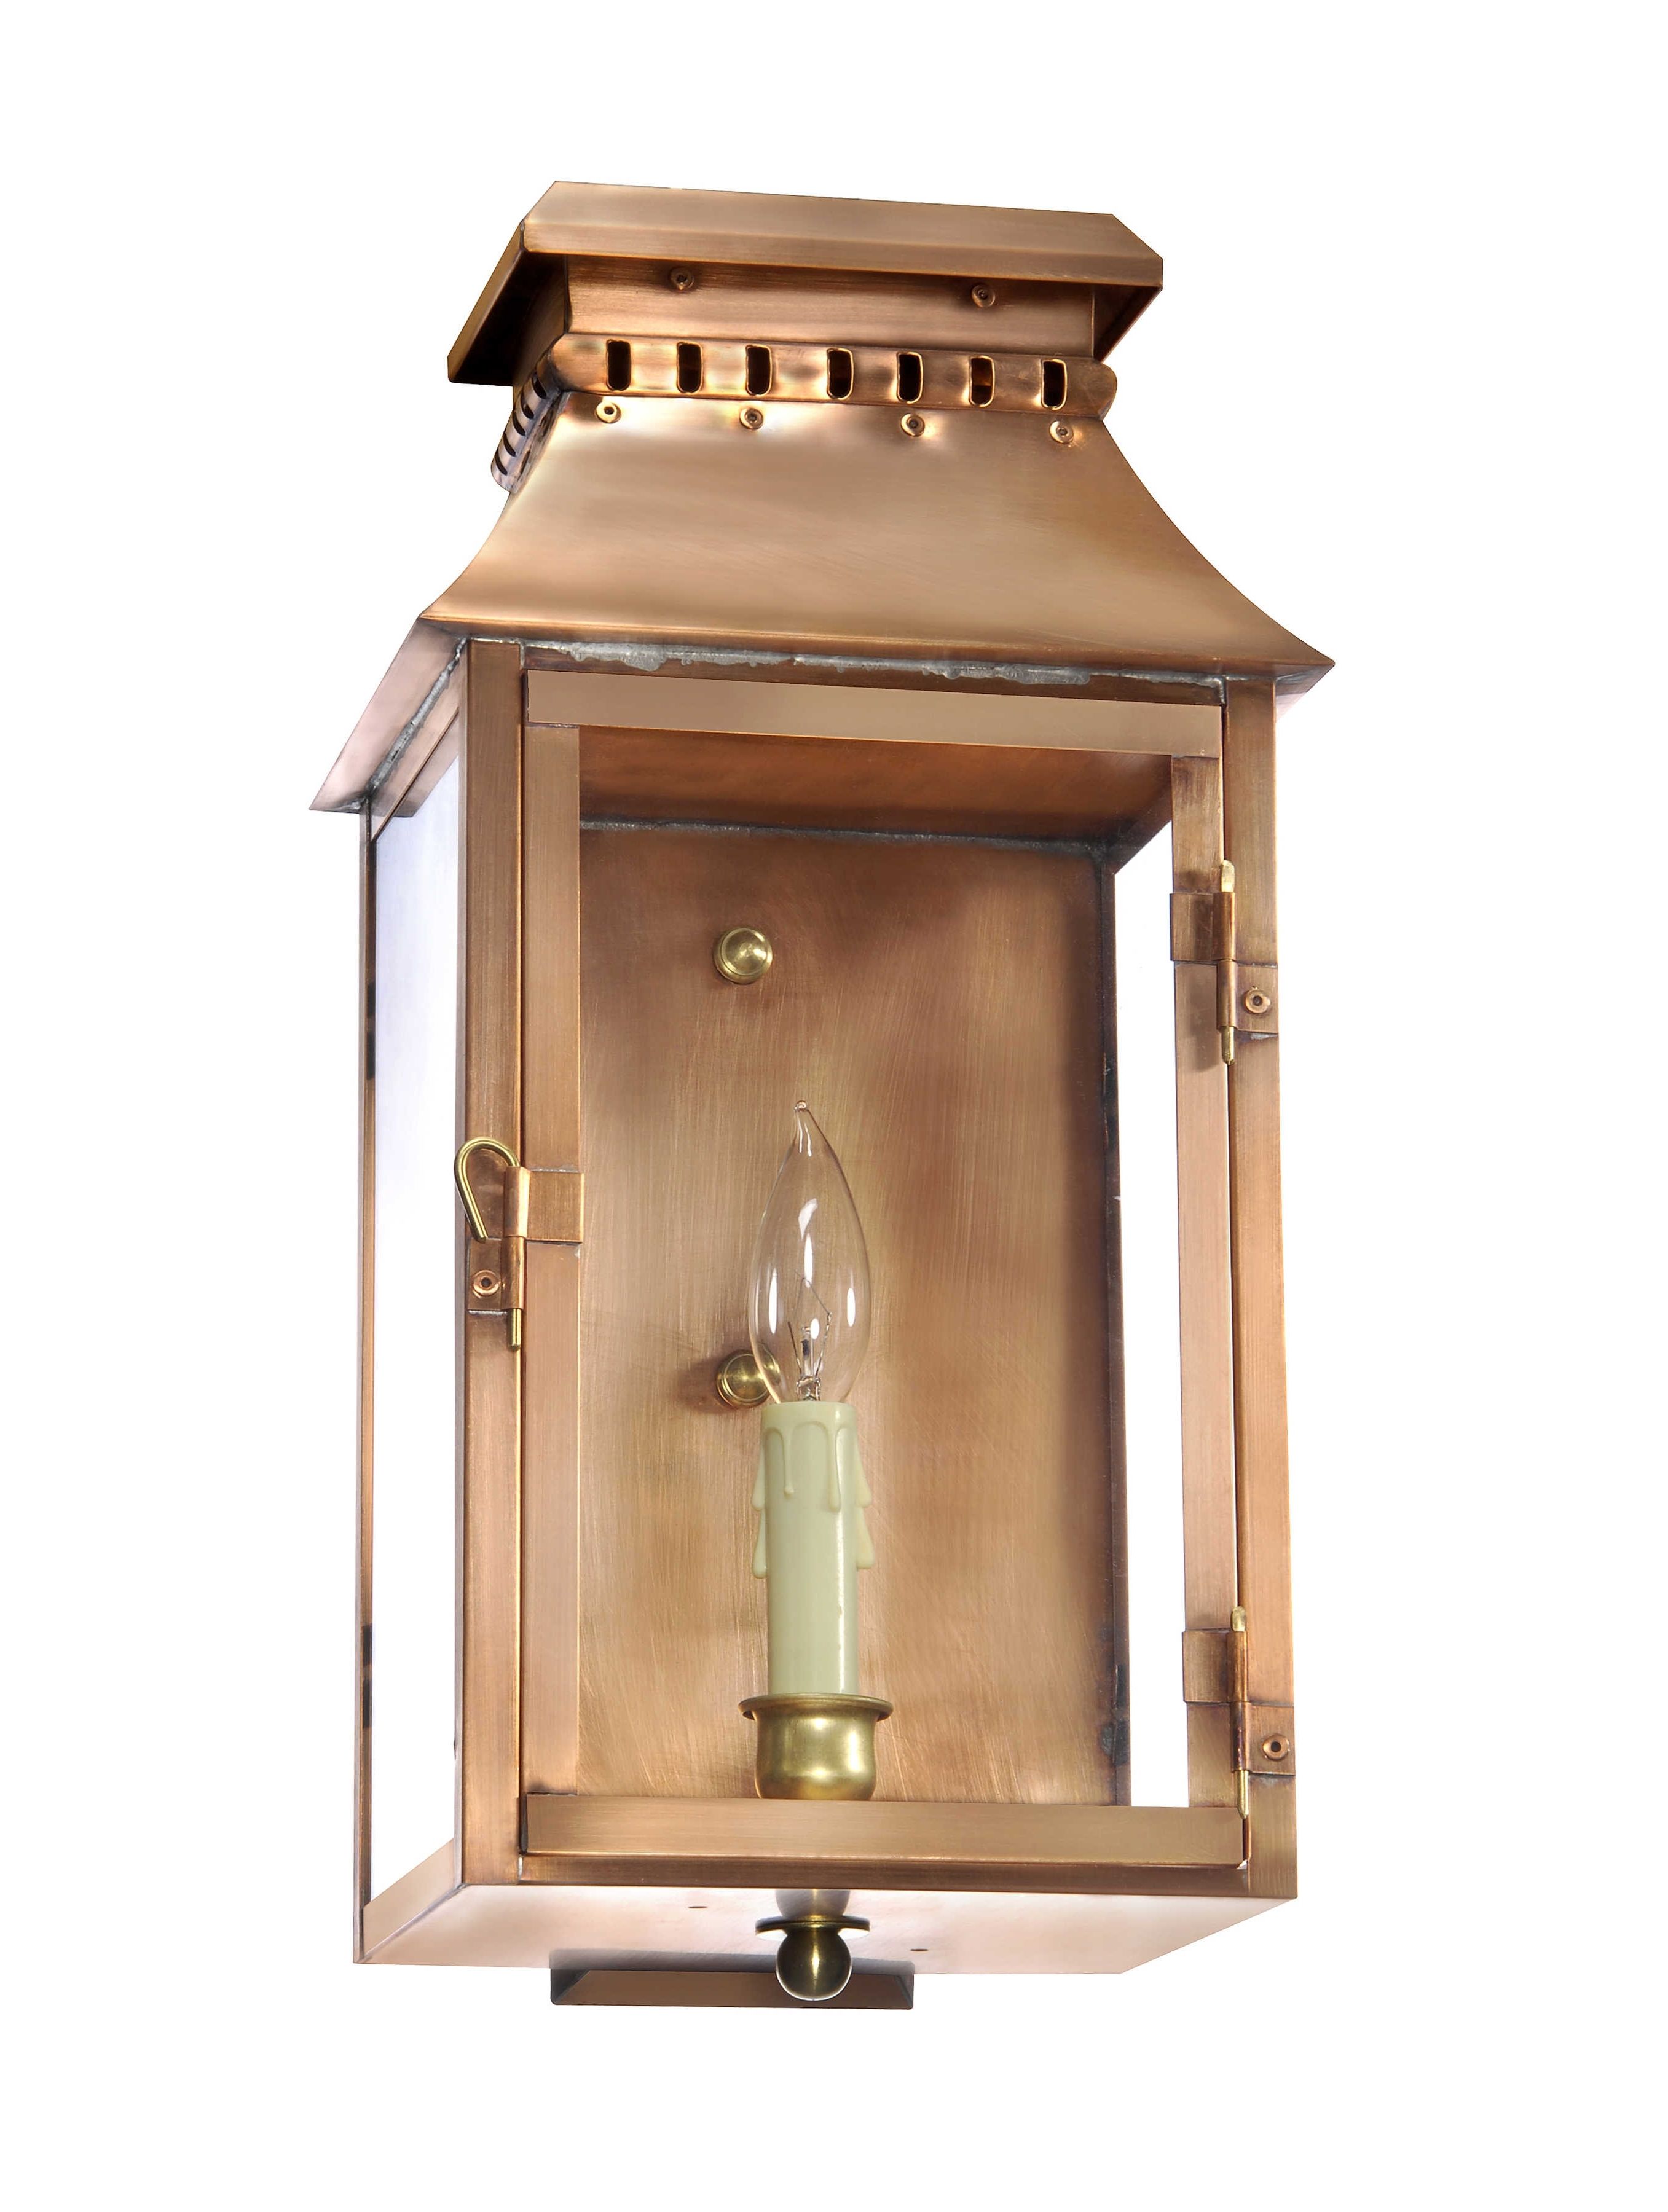 Copper Exterior Lighting – Lantern & Scroll Intended For Outdoor Gas Lanterns (View 6 of 20)